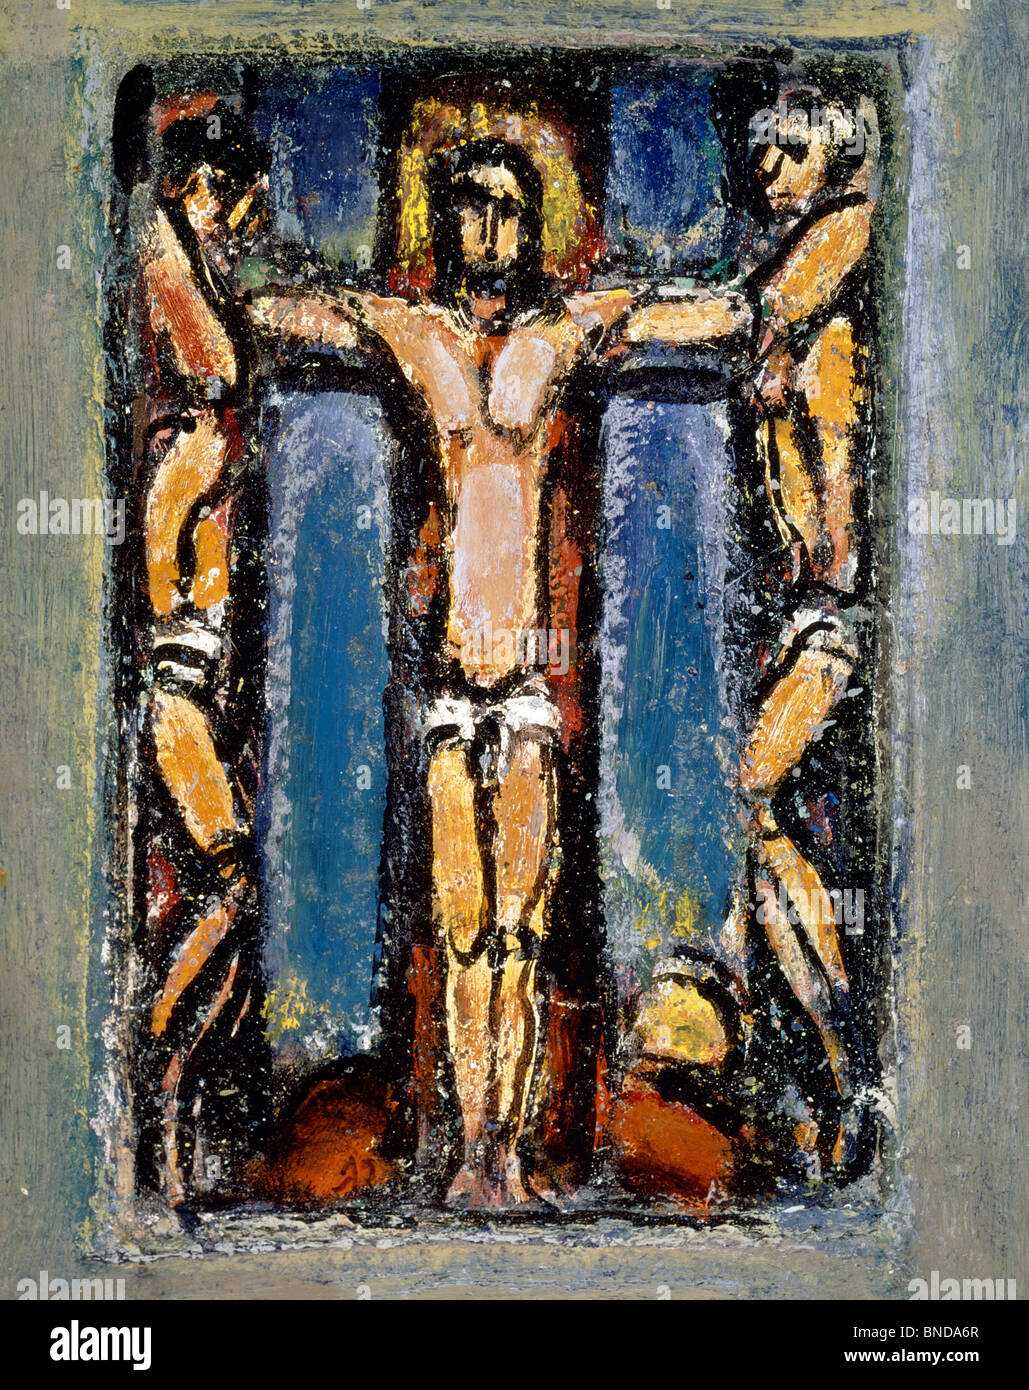 Scene of the Passion: Christ on Cross Between Two Thieves by Georges Rouault, (1871-1958), USA, Texas, Private Collection Stock Photo